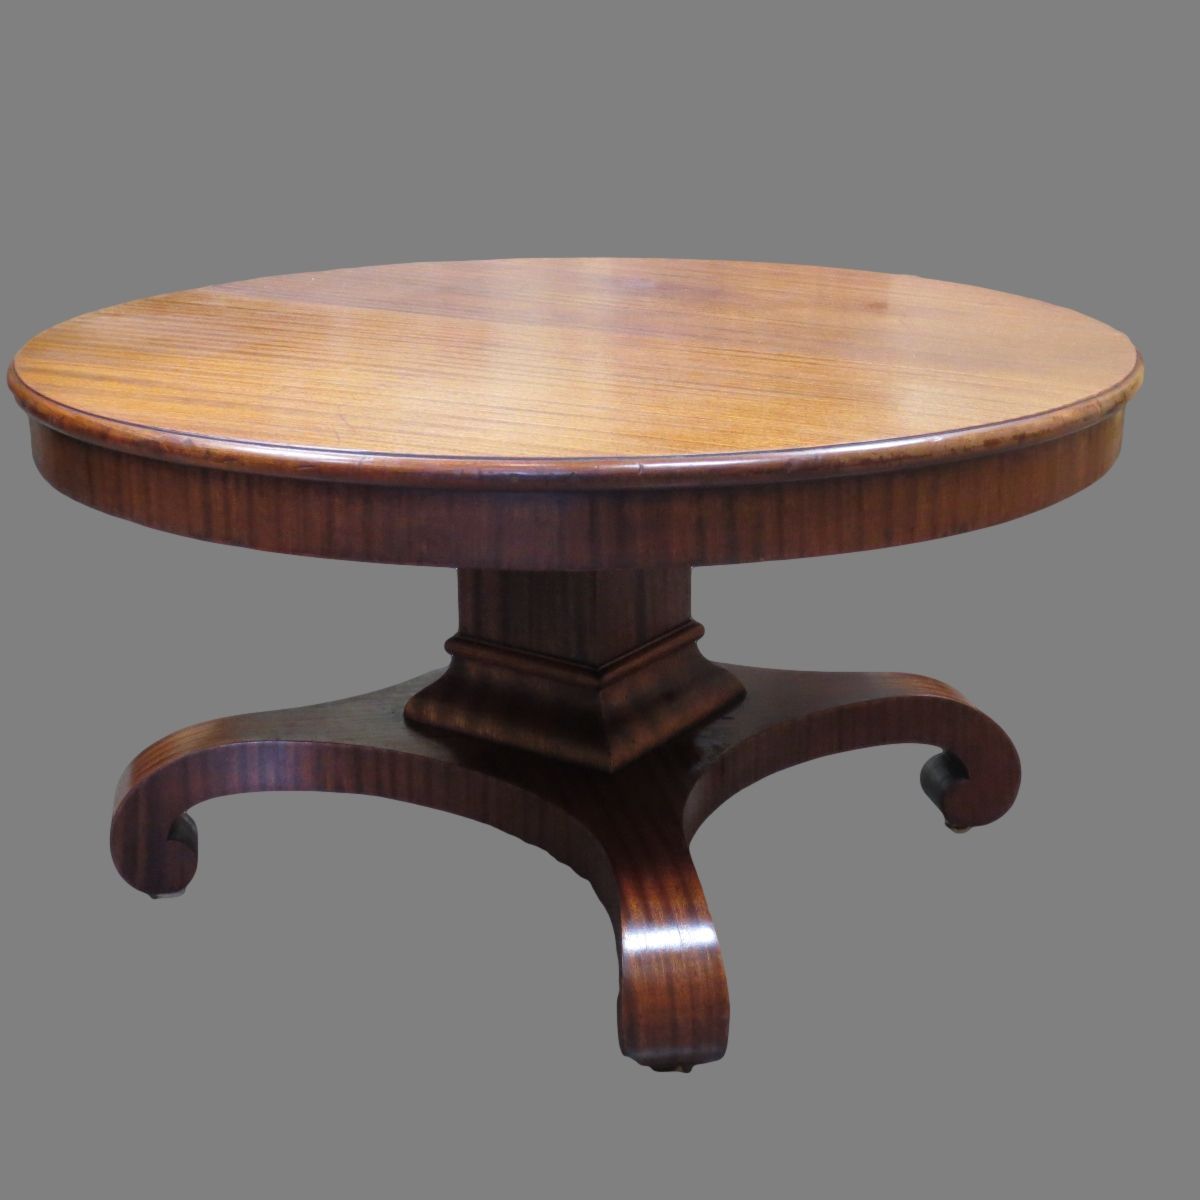 Antique Coffee Tables, Antique Furniture, Antique Coffeetables, Antique Inside American Heritage Round Coffee Tables (View 7 of 20)